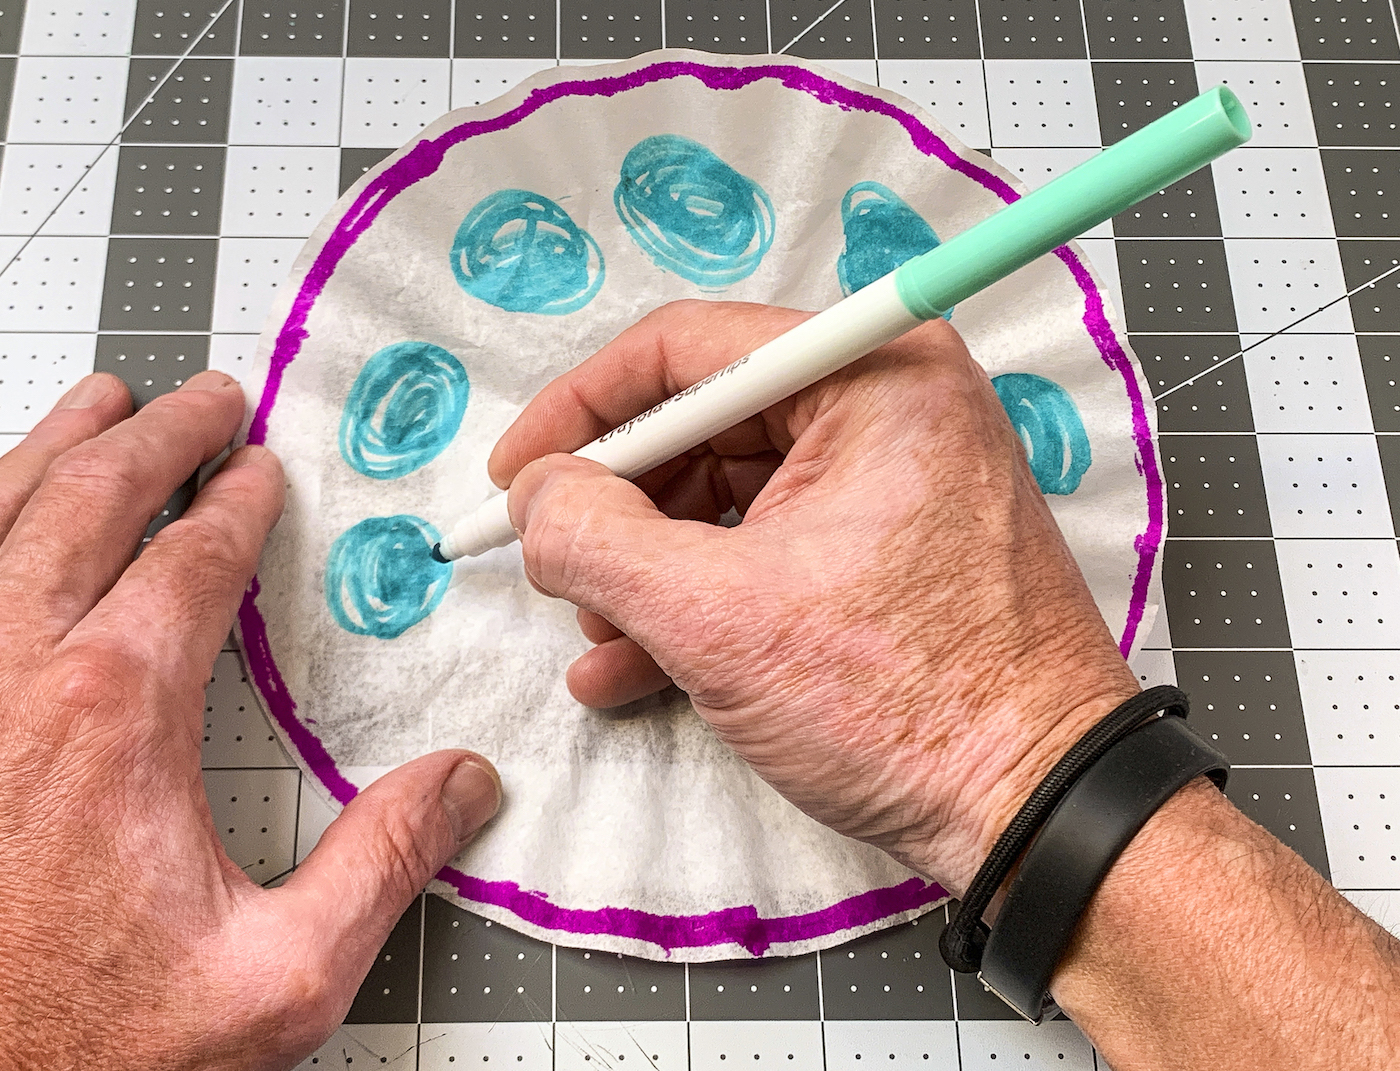 Drawing blue circles on the coffee filter